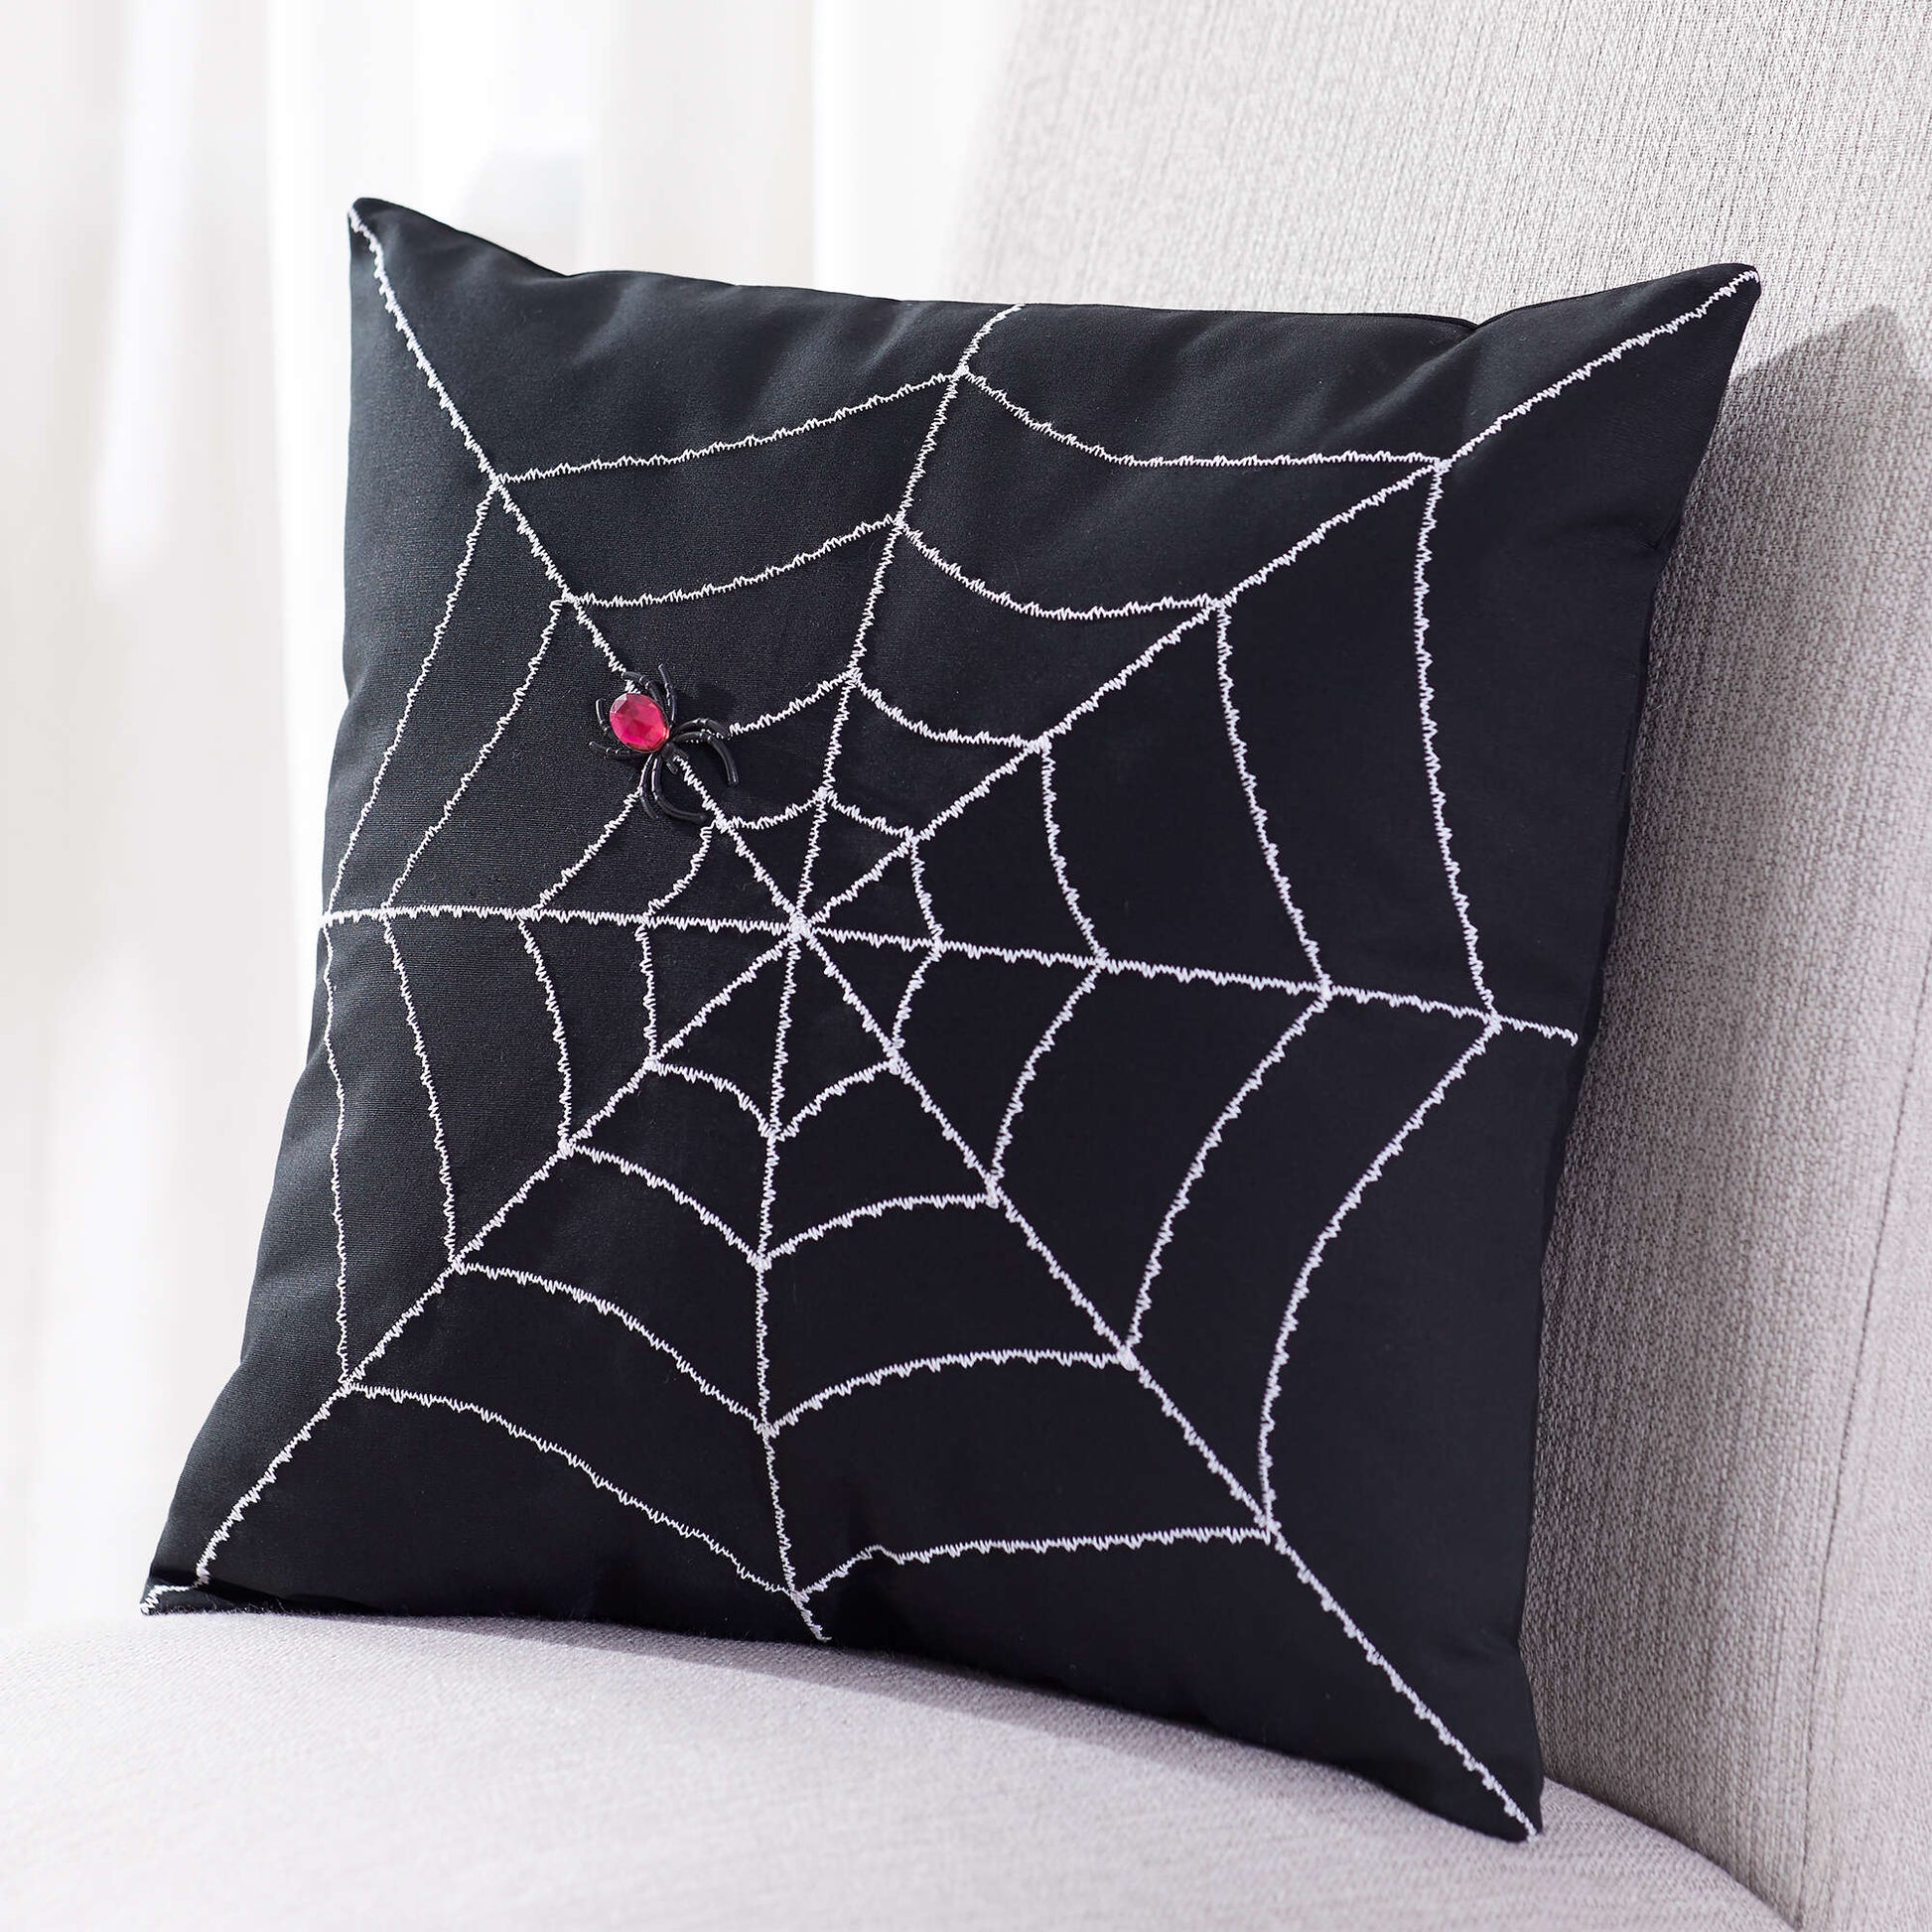 Free Coats & Clark Sewing Spider Web Pillow Pattern